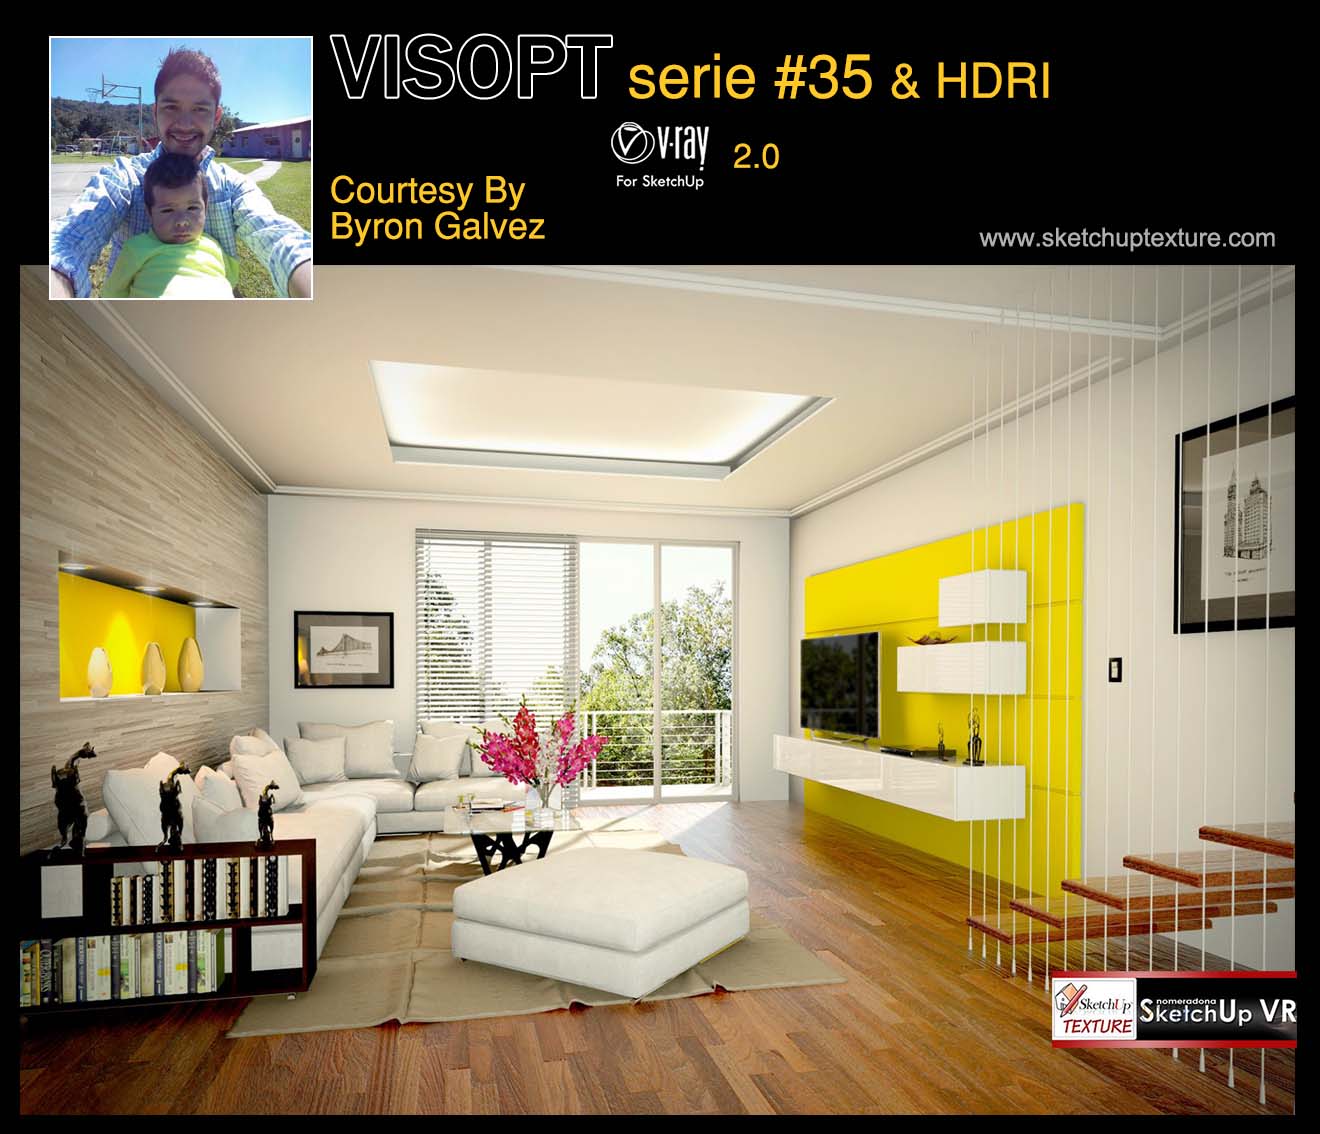 vray 2.0 visopt serie interior and exterior  #35 & Hdri by Byron Galvez